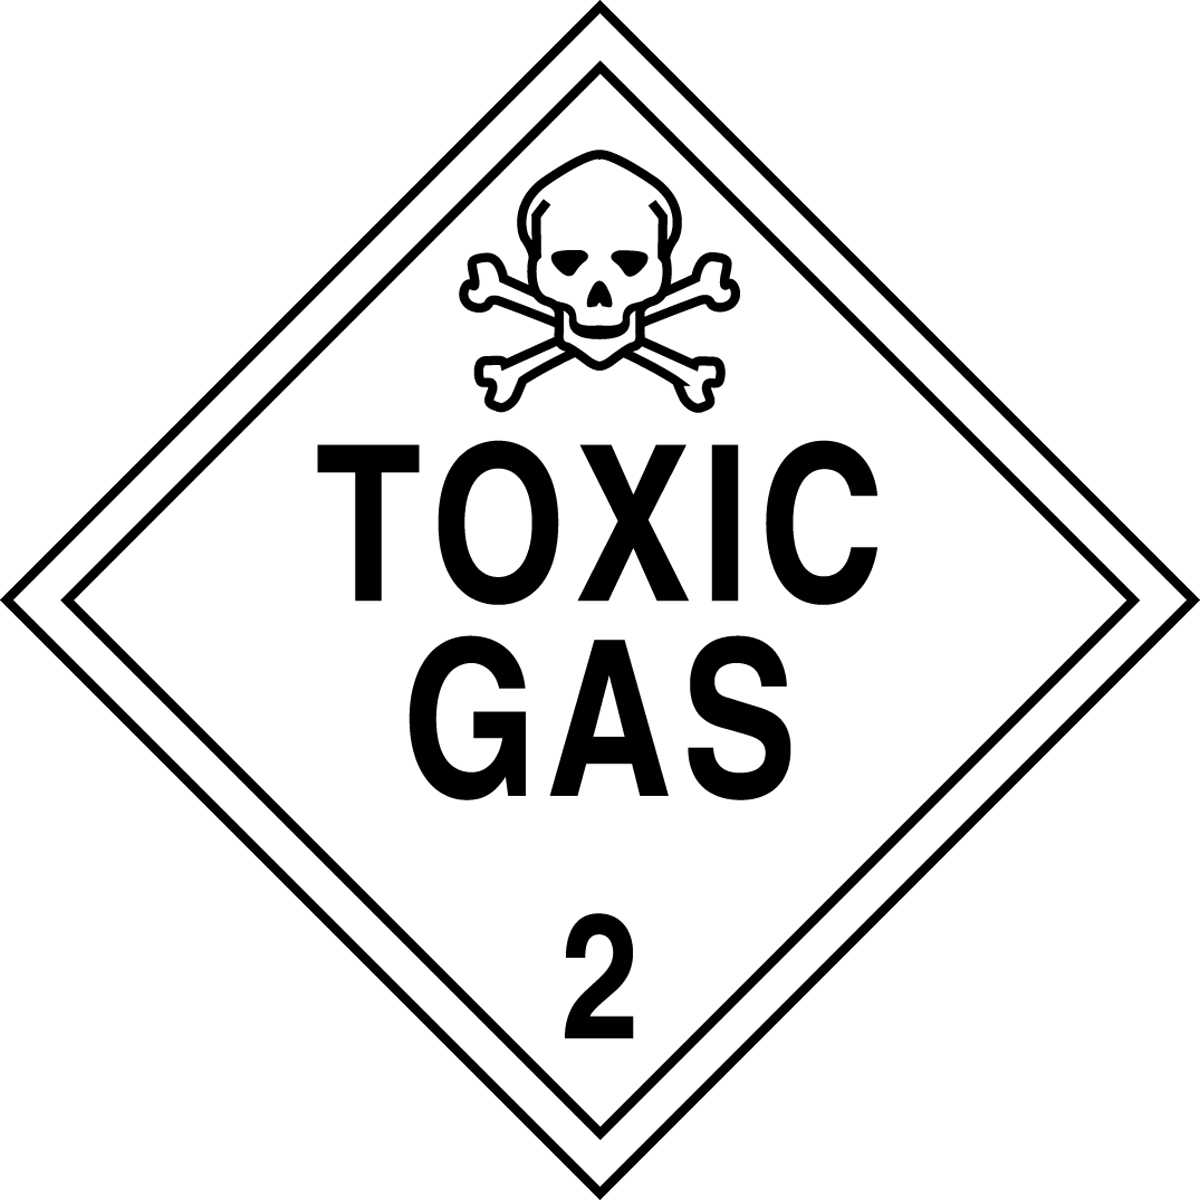 TOXIC GAS (W/GRAPHIC)